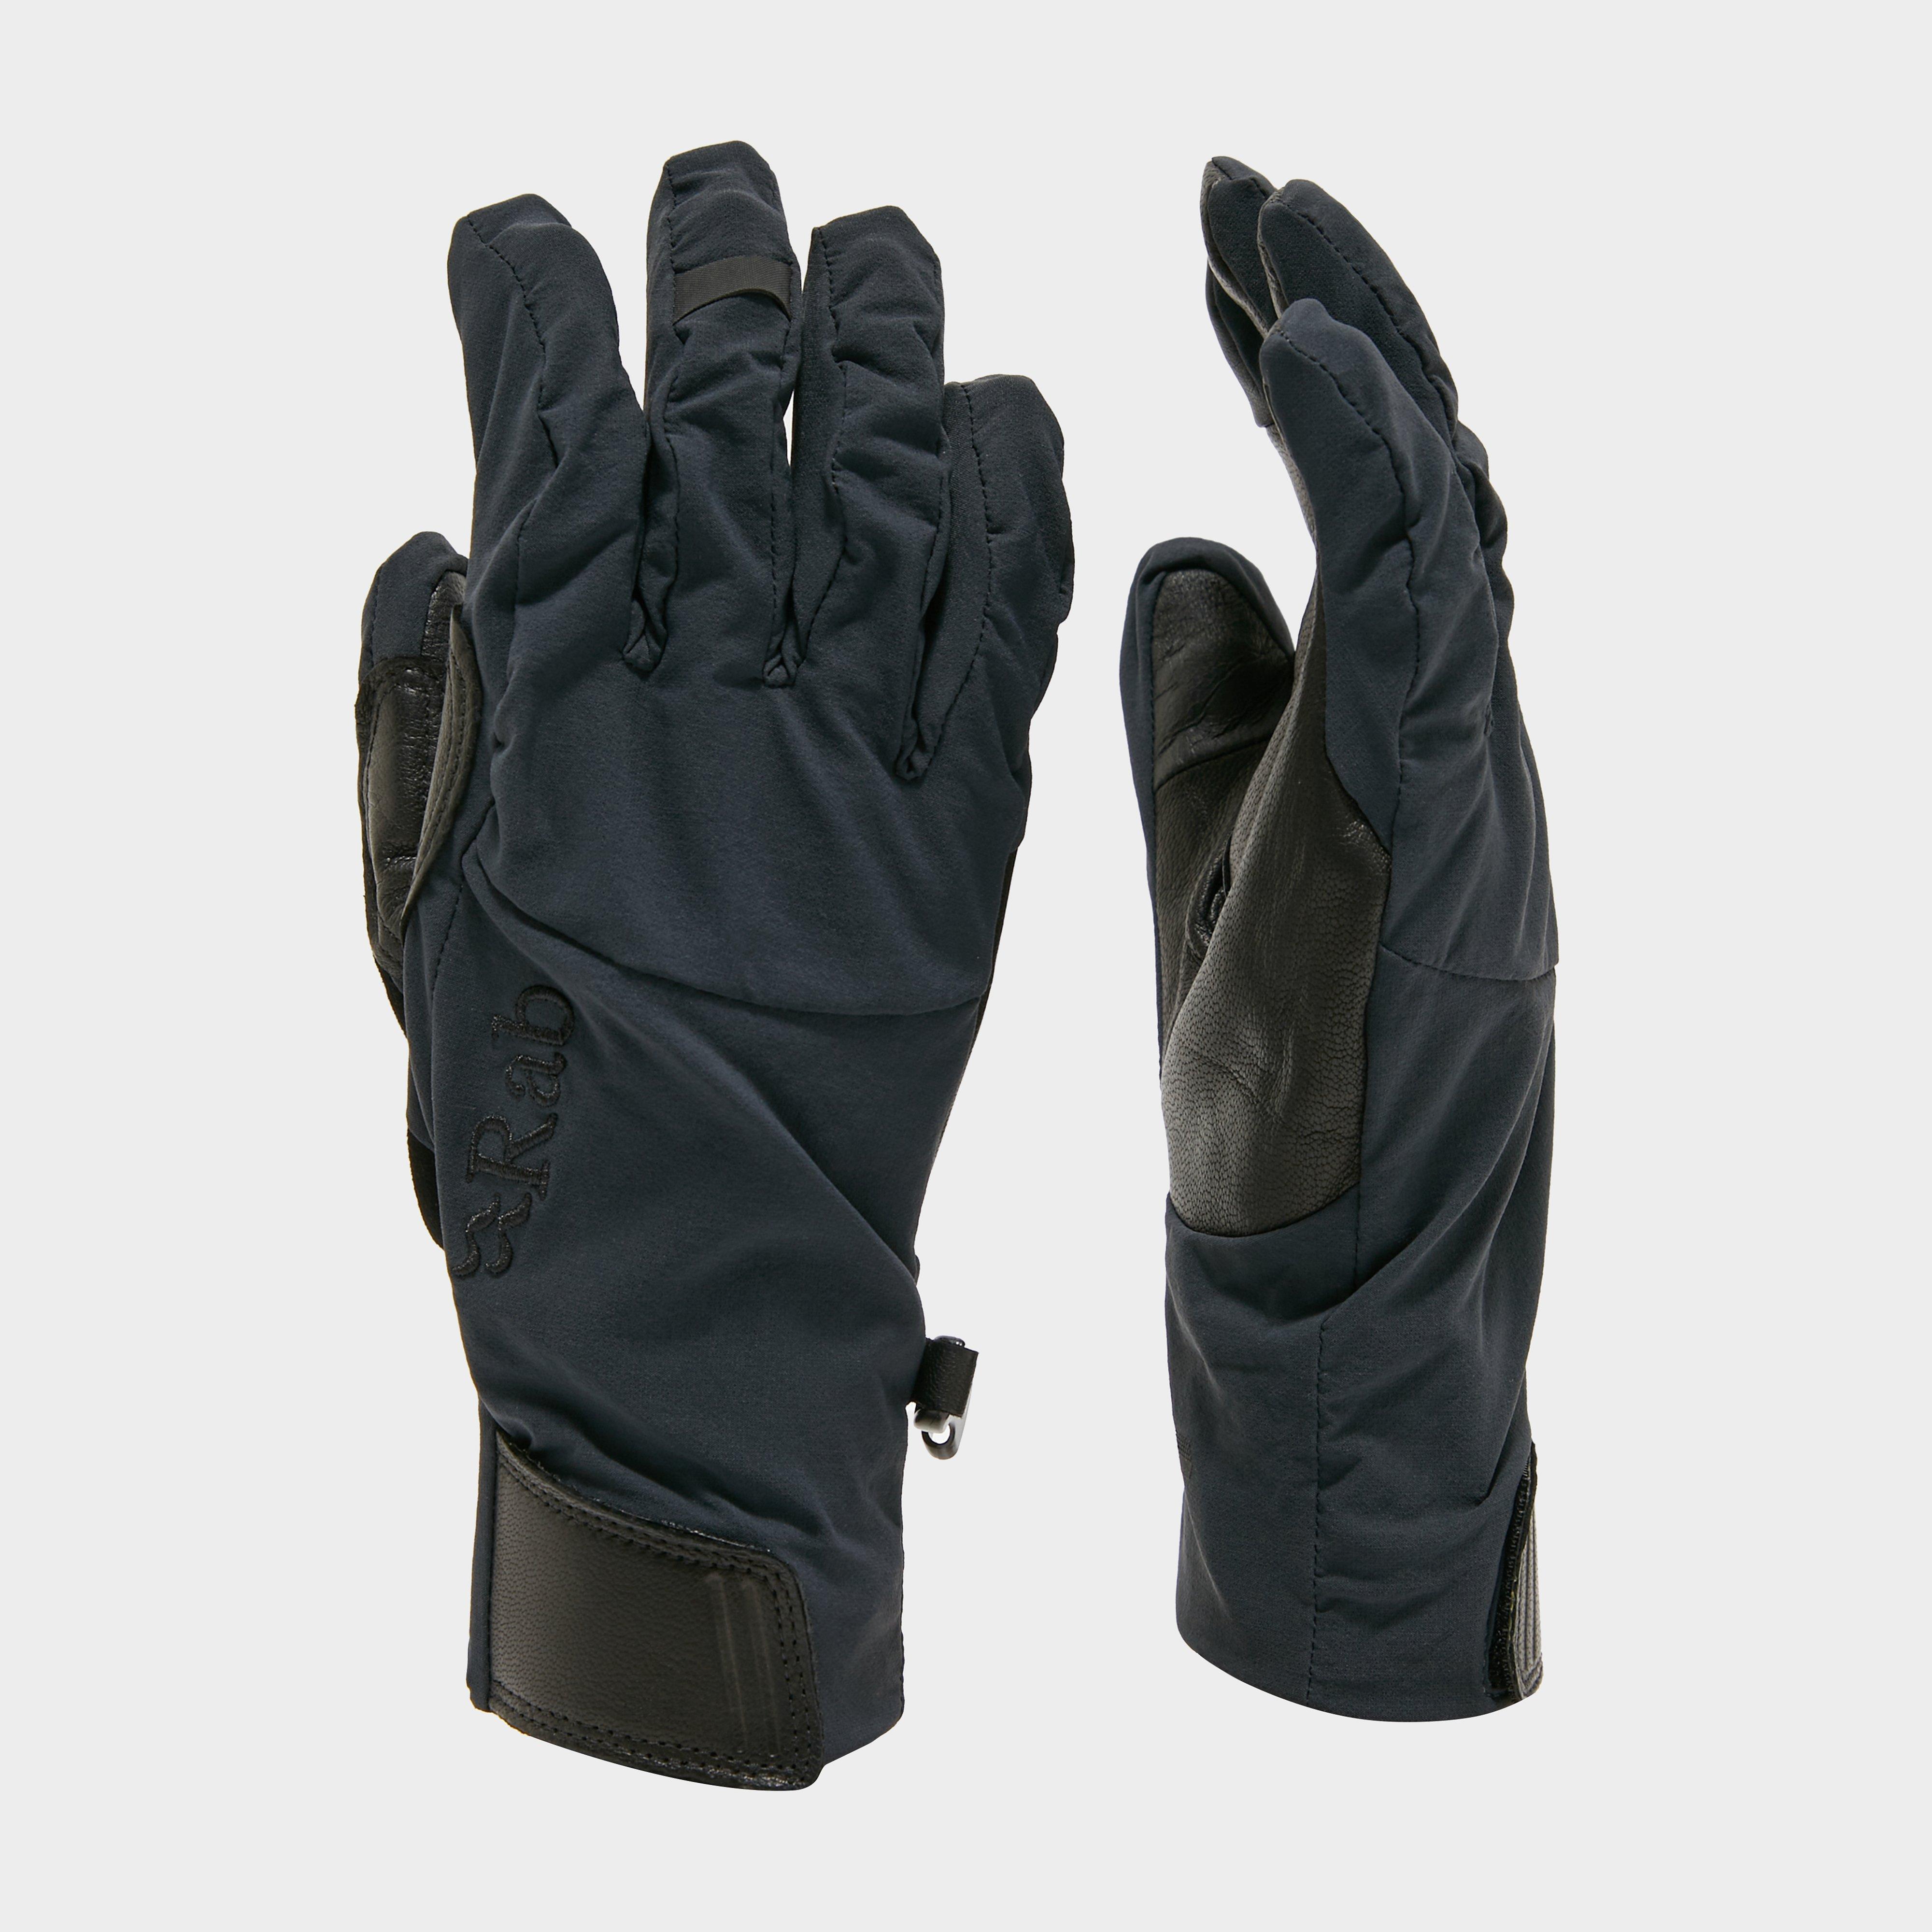 Rab Men's Power Stretch Contact Glove Review